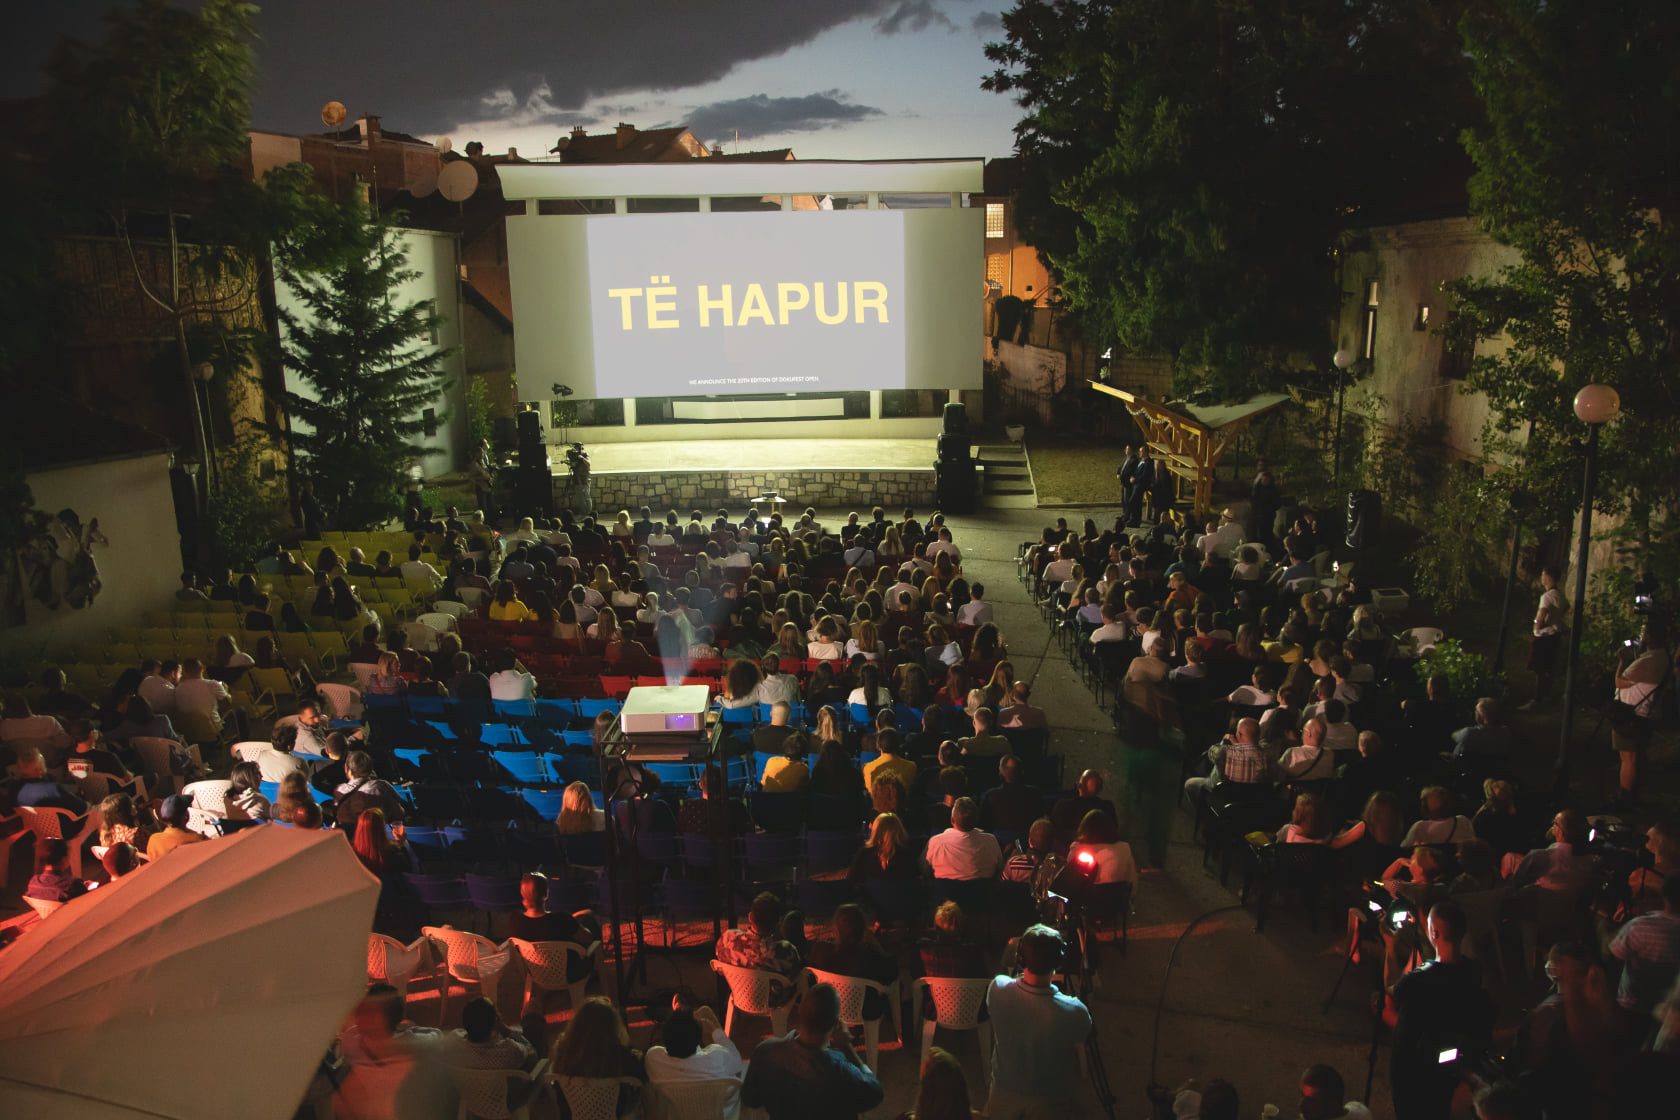 WE’RE HIRING: JOB OPENINGS FOR THE 22ND EDITION OF THE FESTIVAL